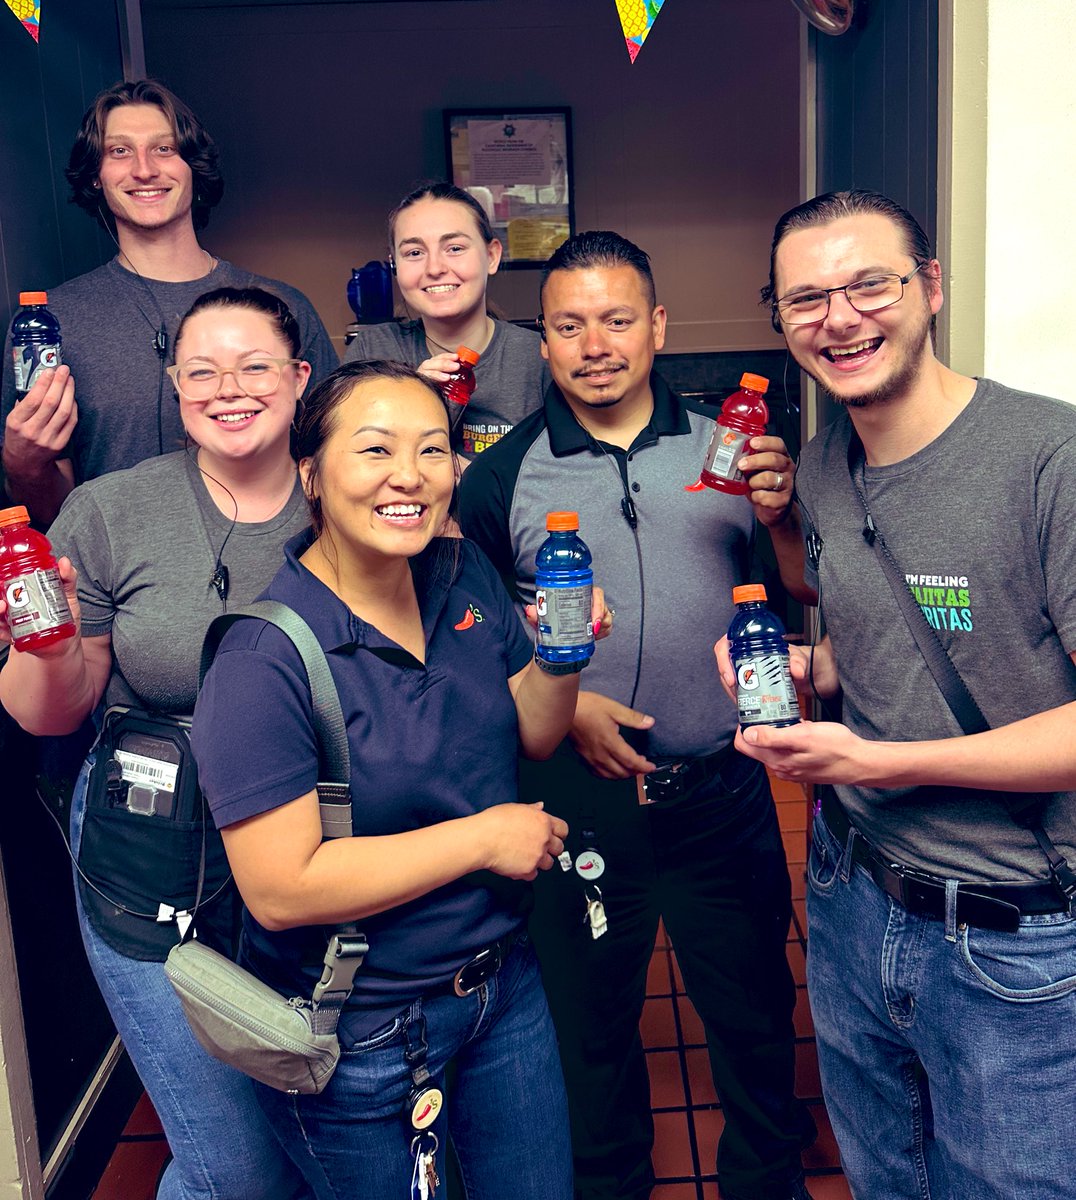 It’s #NationalHydrationDay  so we got our team Gatorades to keep them going on this Friday night.  #cultureday #bestcoast #CA #chilislove #cartercrew